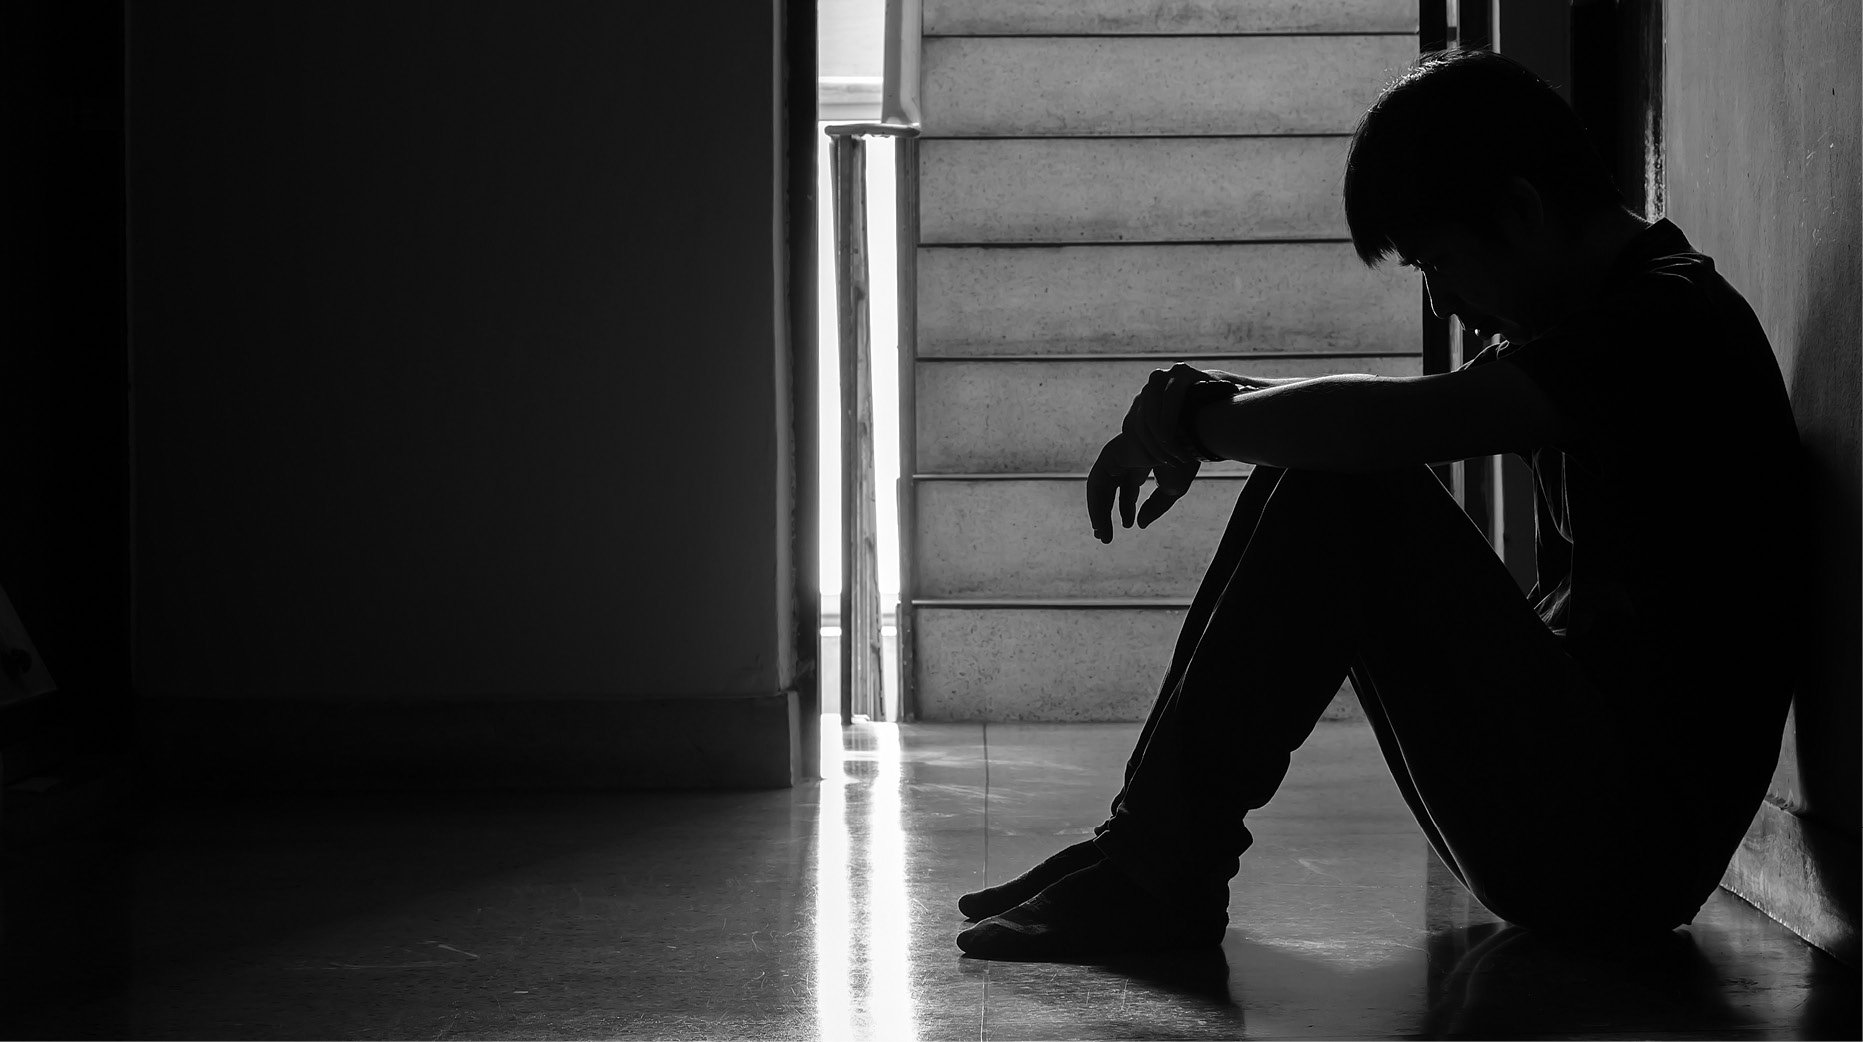  Hero Image The Dark And Lonely World Of Depression 